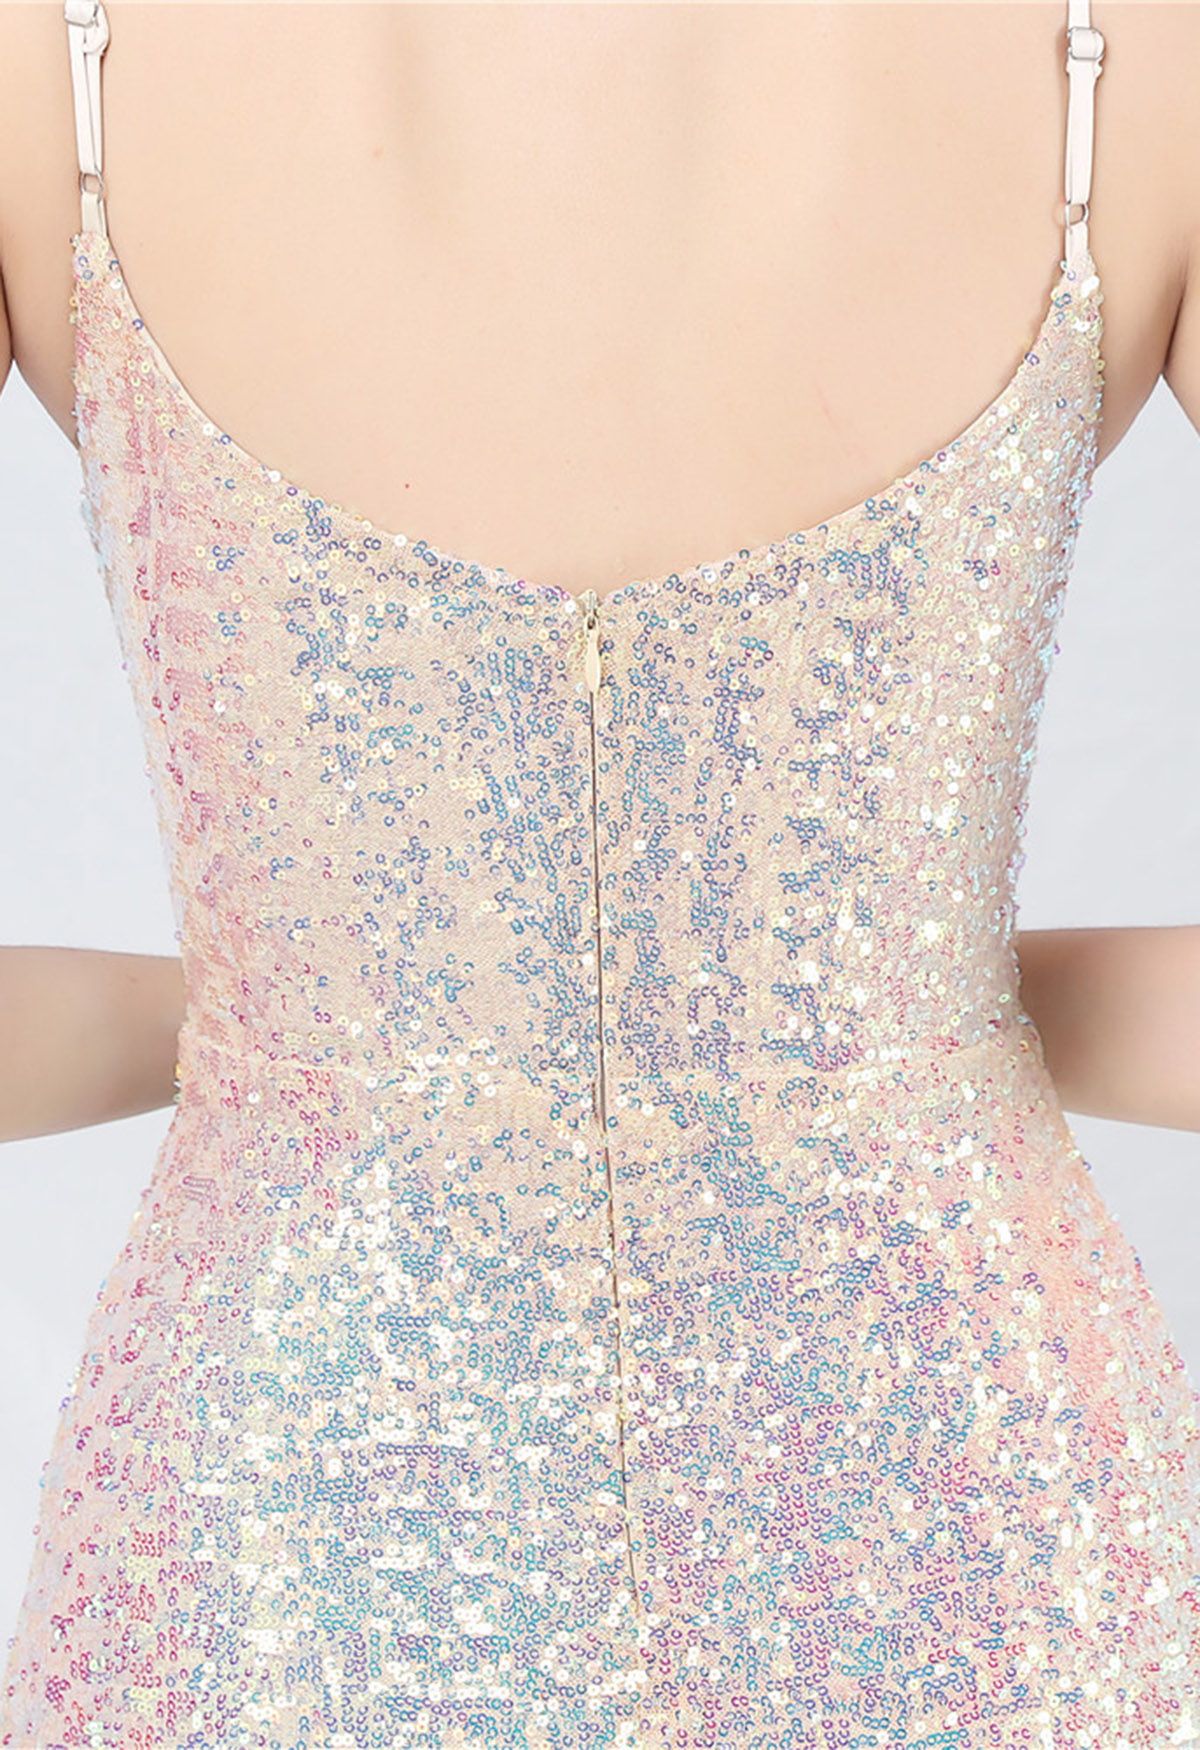 Fairytale Sequin Mermaid Cami Gown in Apricot